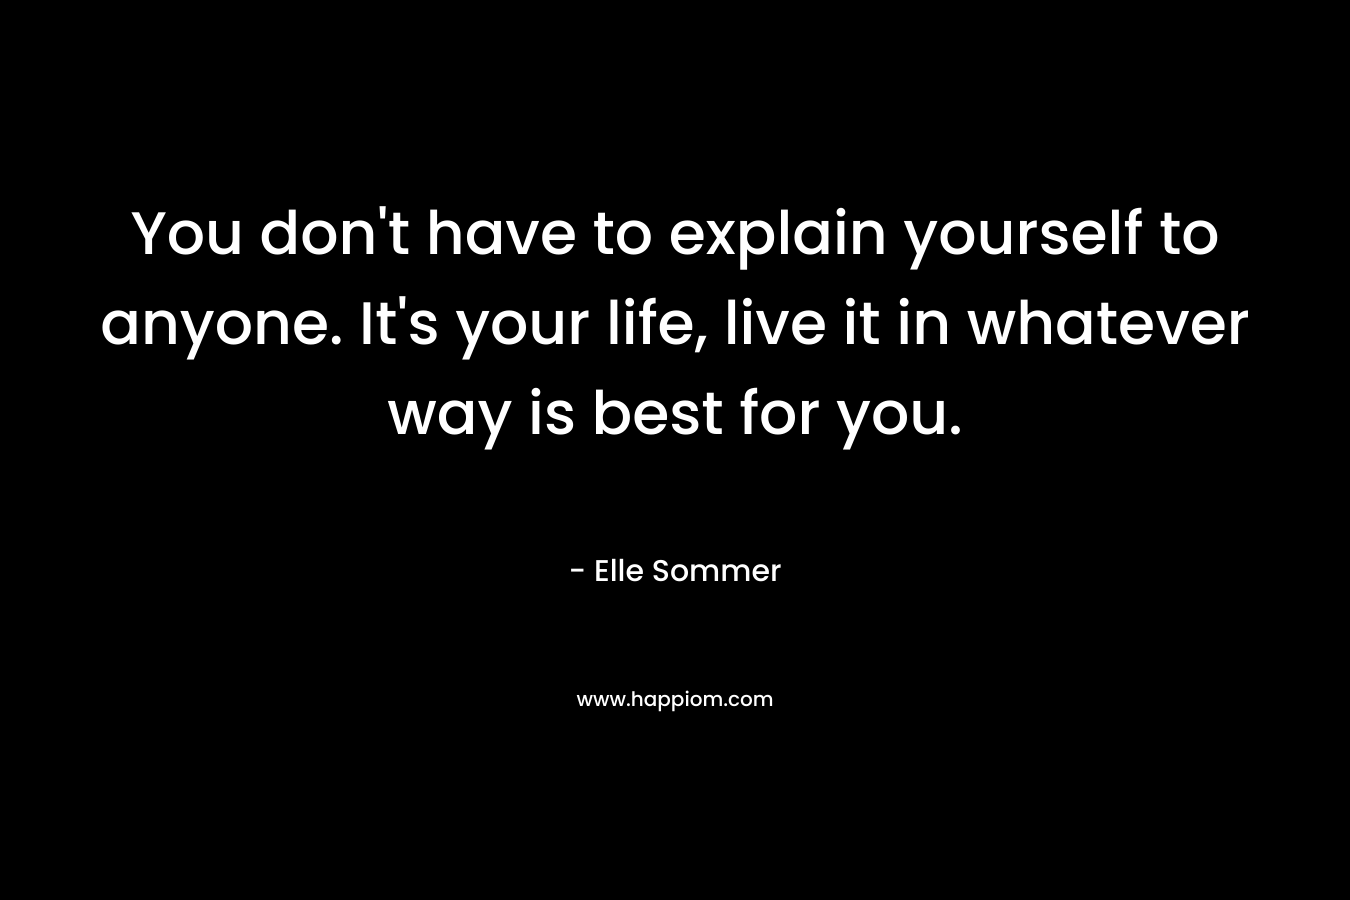 You don't have to explain yourself to anyone. It's your life, live it in whatever way is best for you.